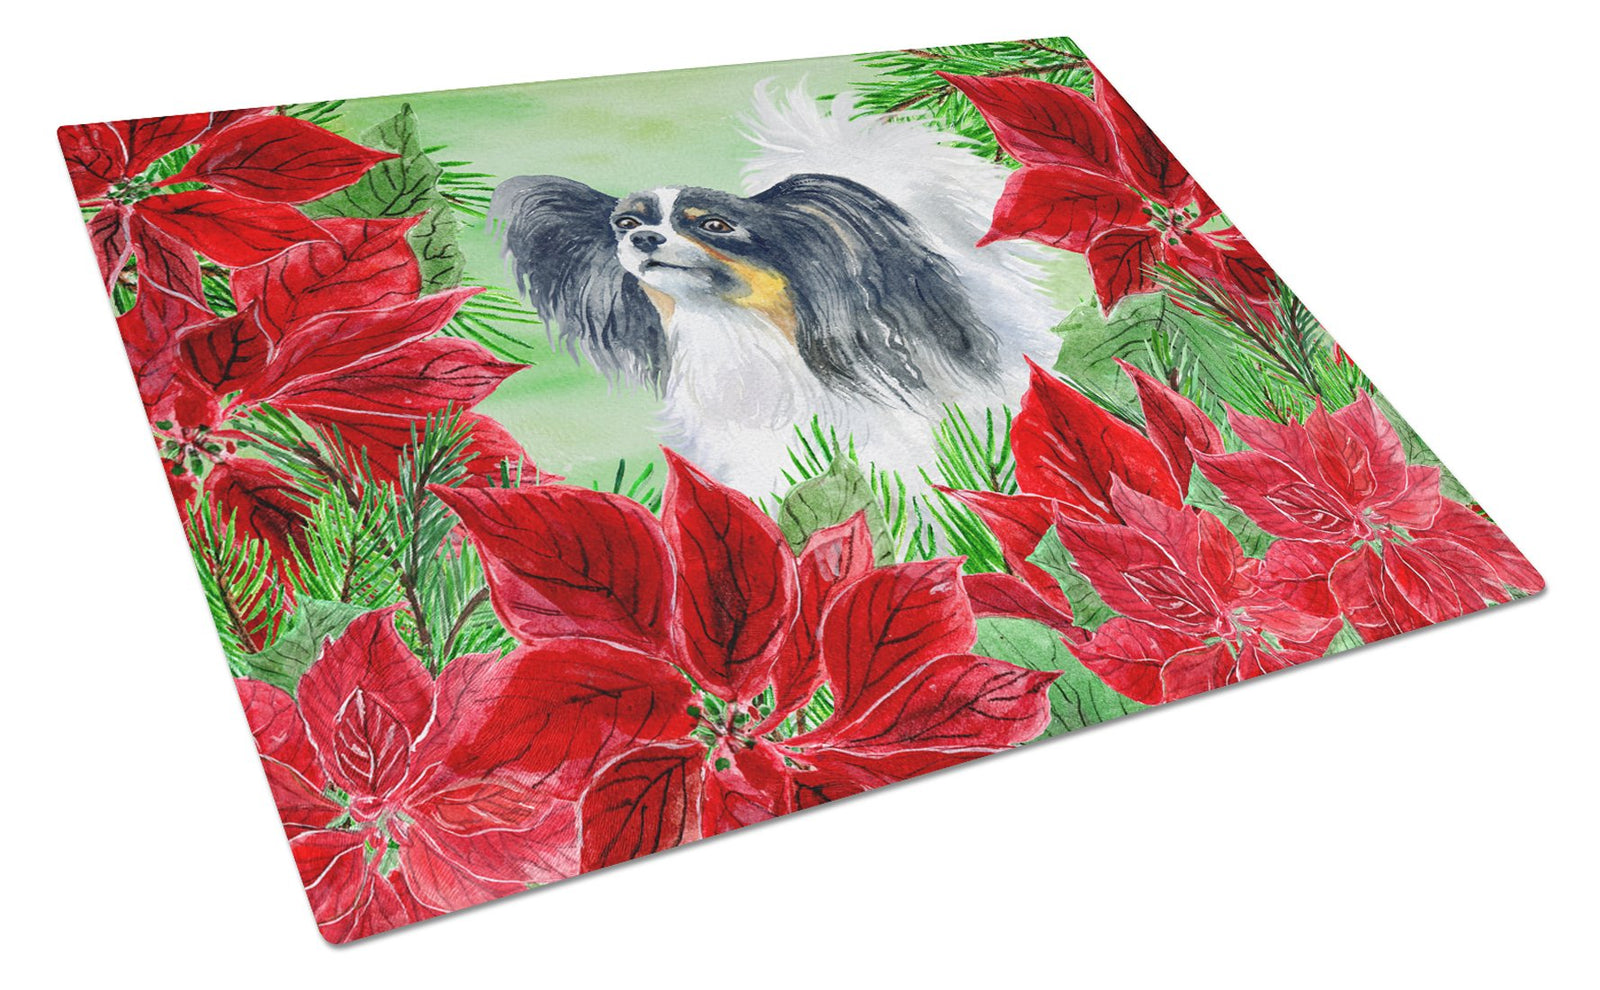 Papillon Poinsettas Glass Cutting Board Large CK1305LCB by Caroline's Treasures